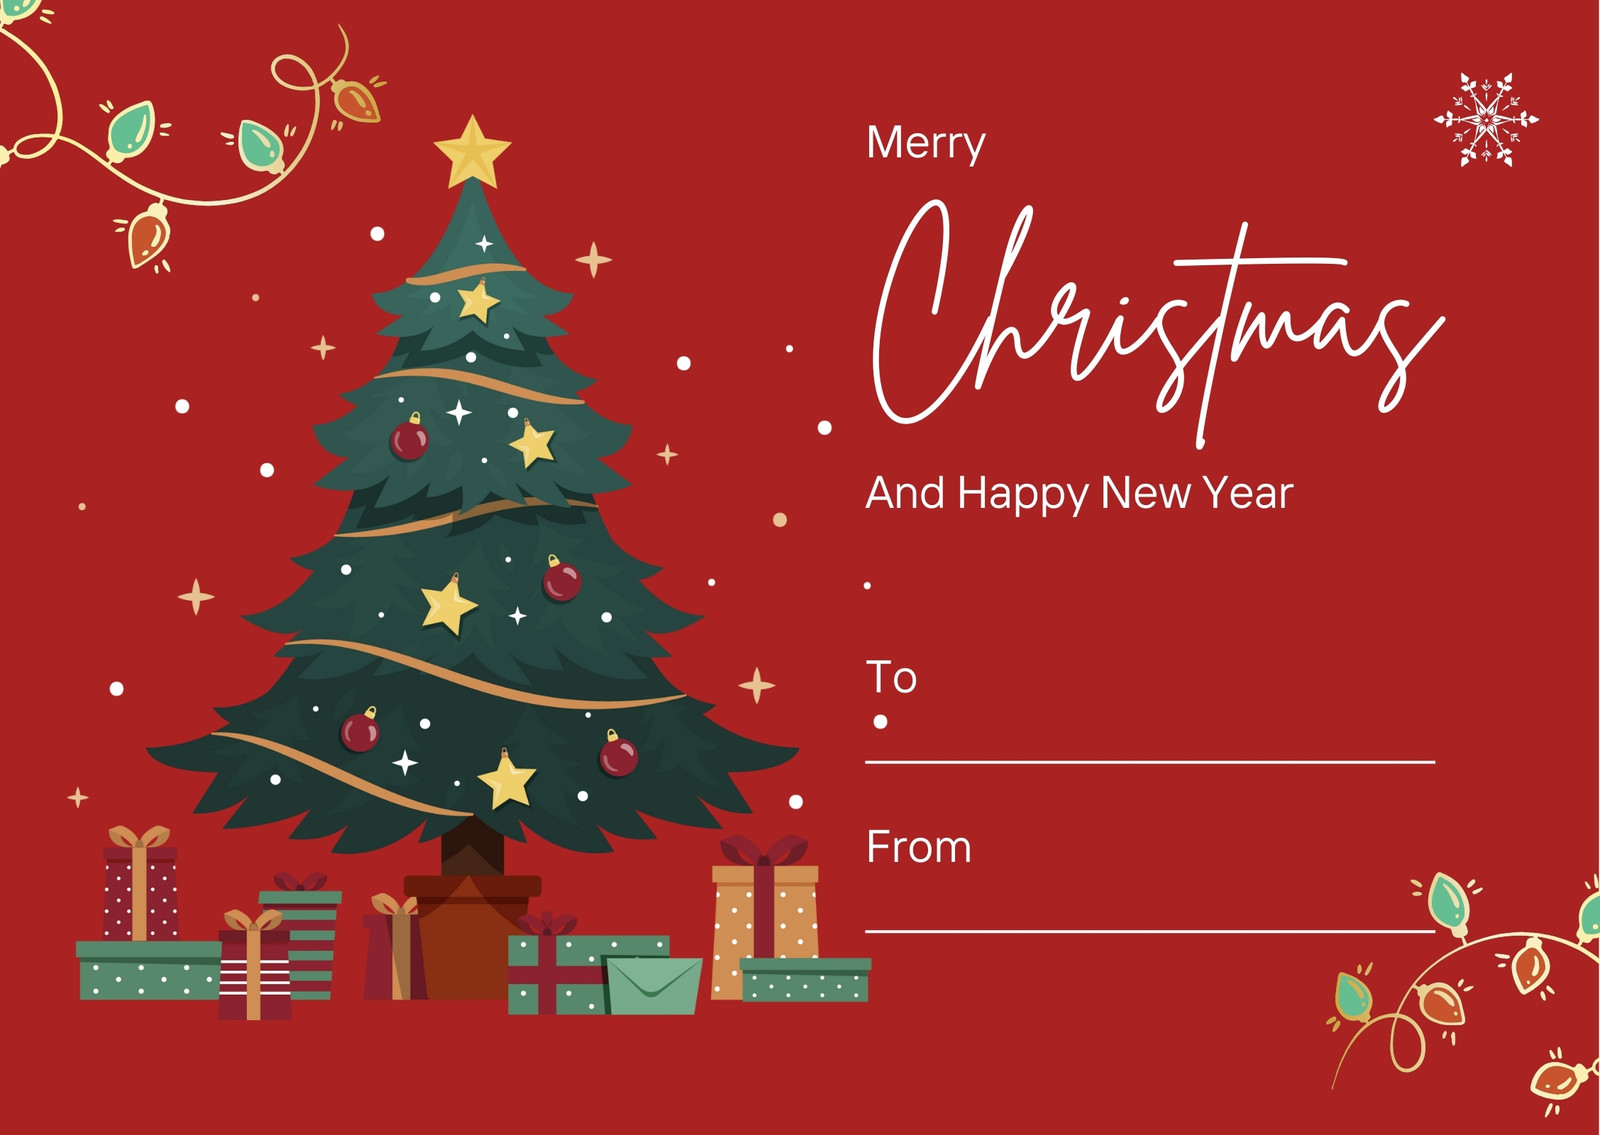 Holiday Card Template, Christmas Resources